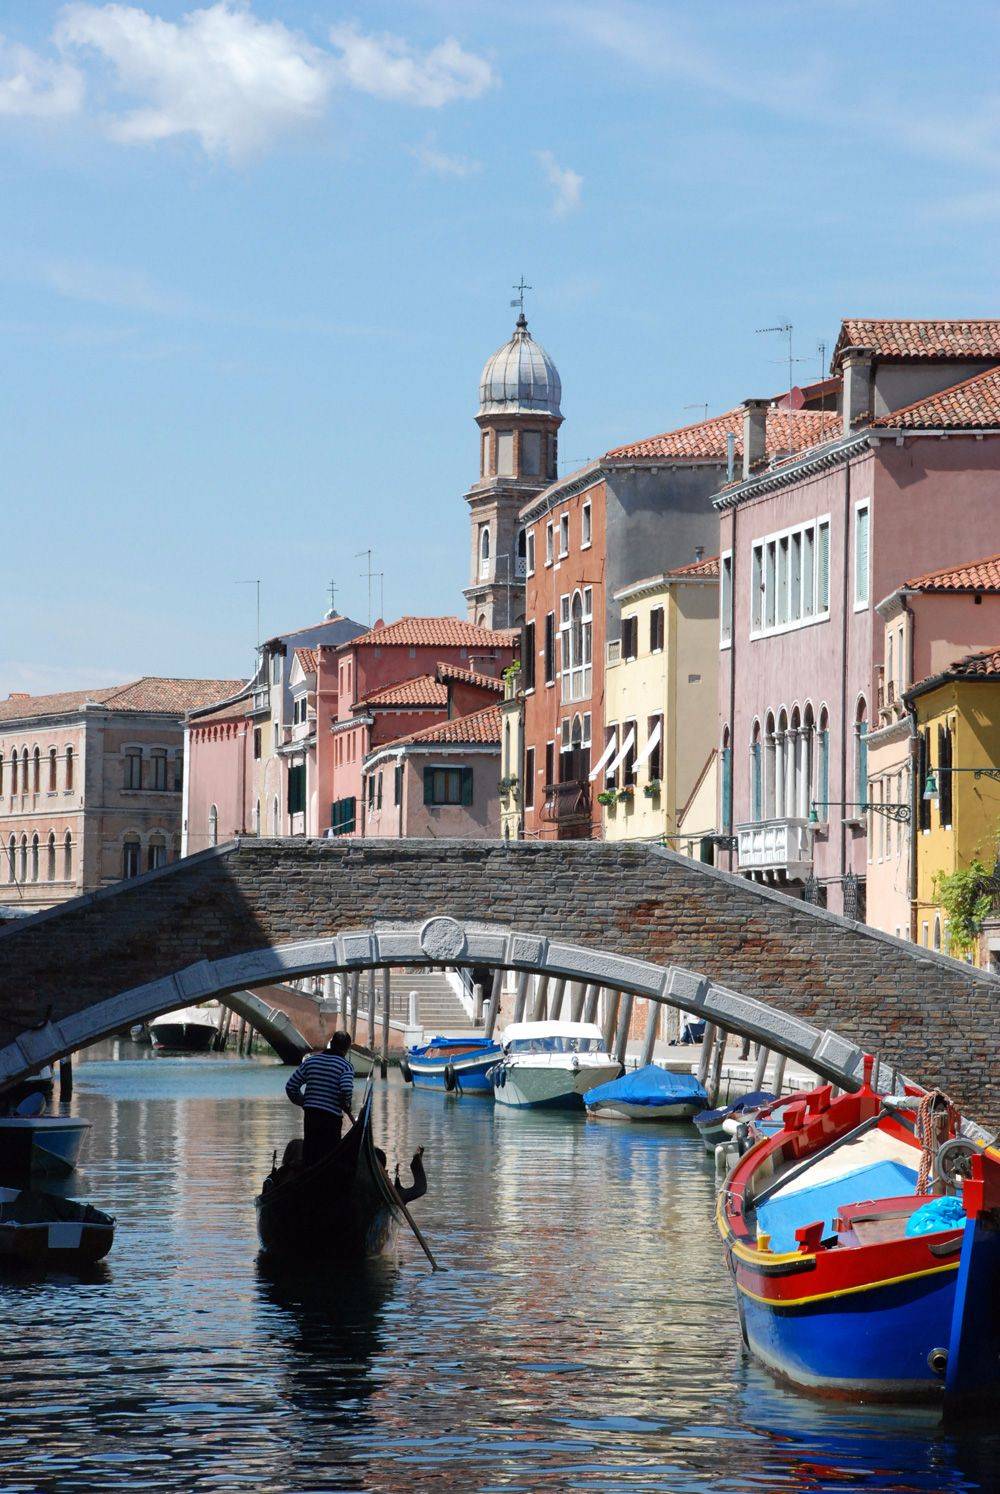 the surroundings are considered the most picturesque in Venice